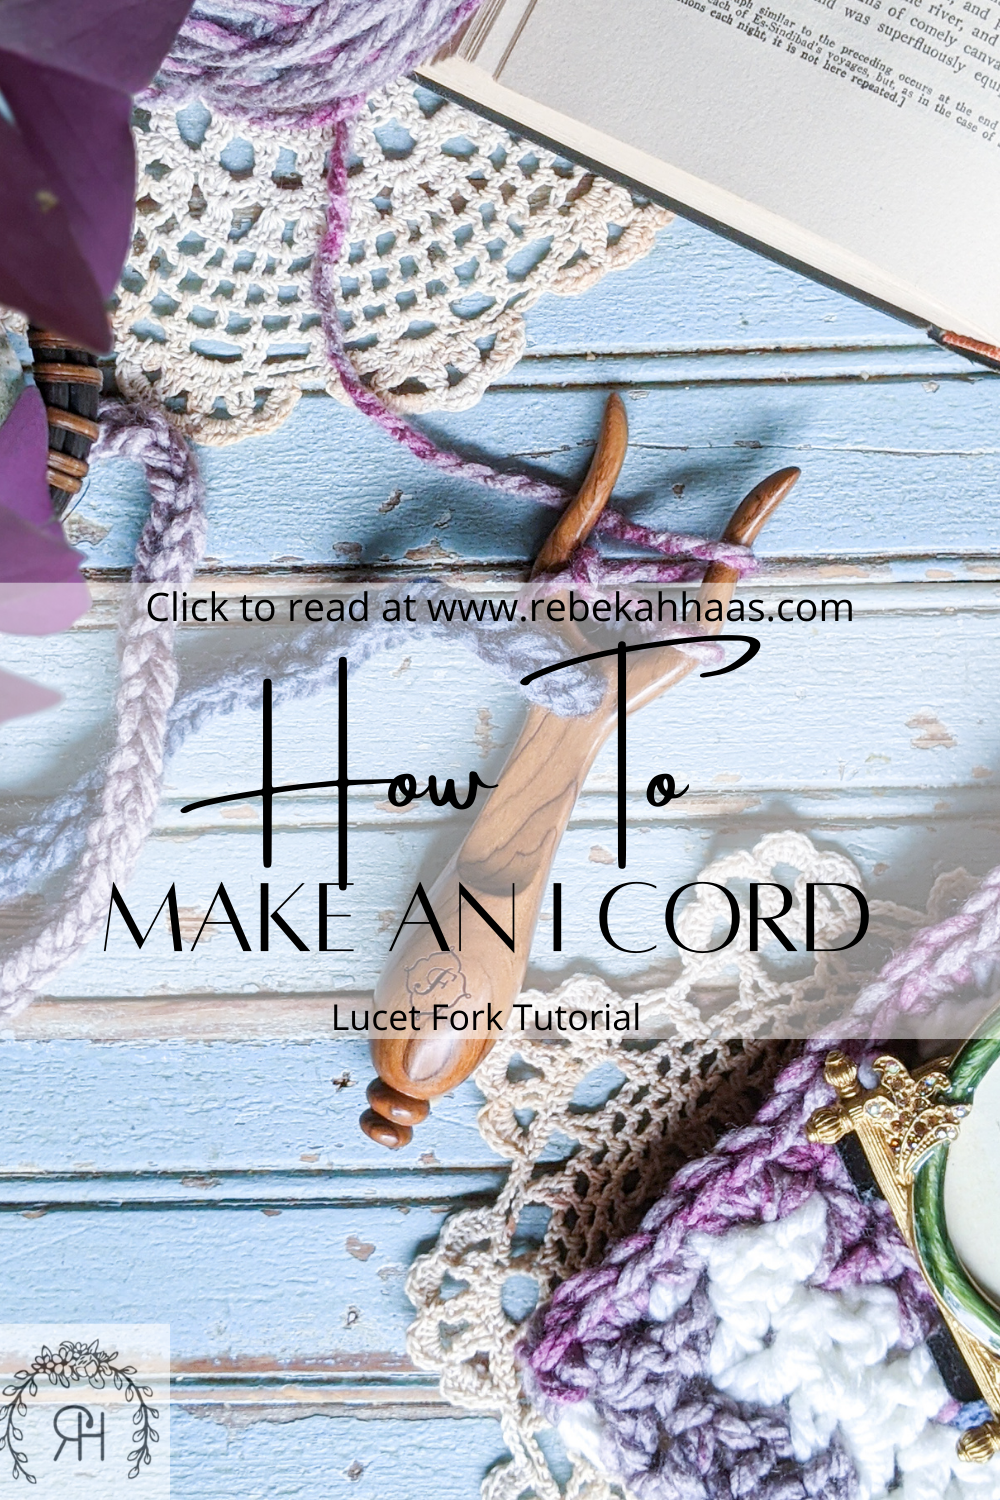 Condo Blues: How to Make an Upcycled Lucet Crochet Fork